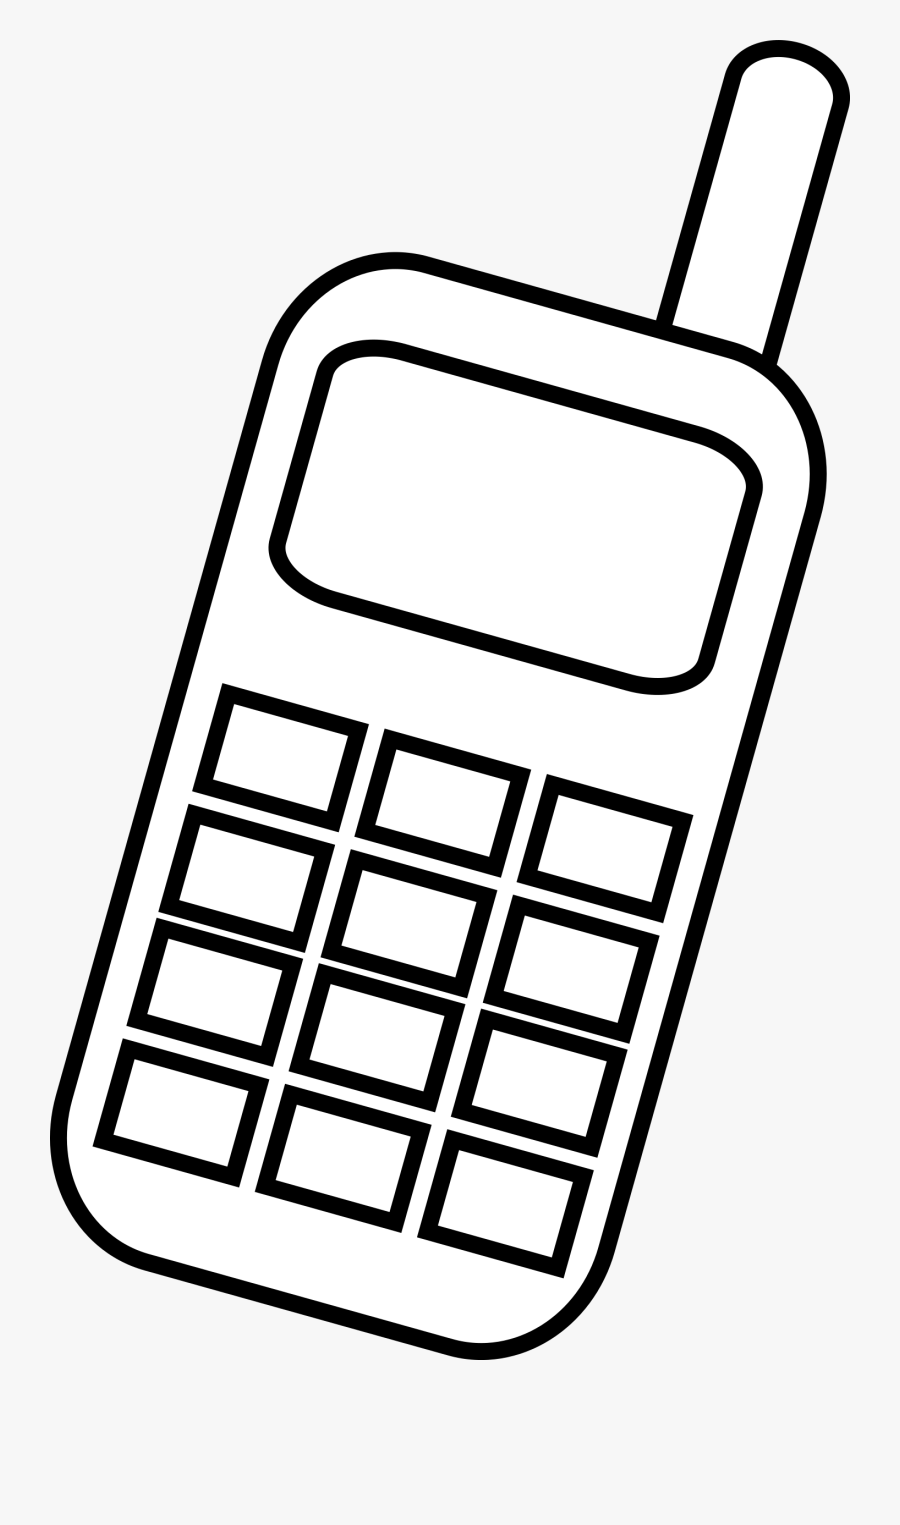 Mobile Clipart Black And White, Transparent Clipart